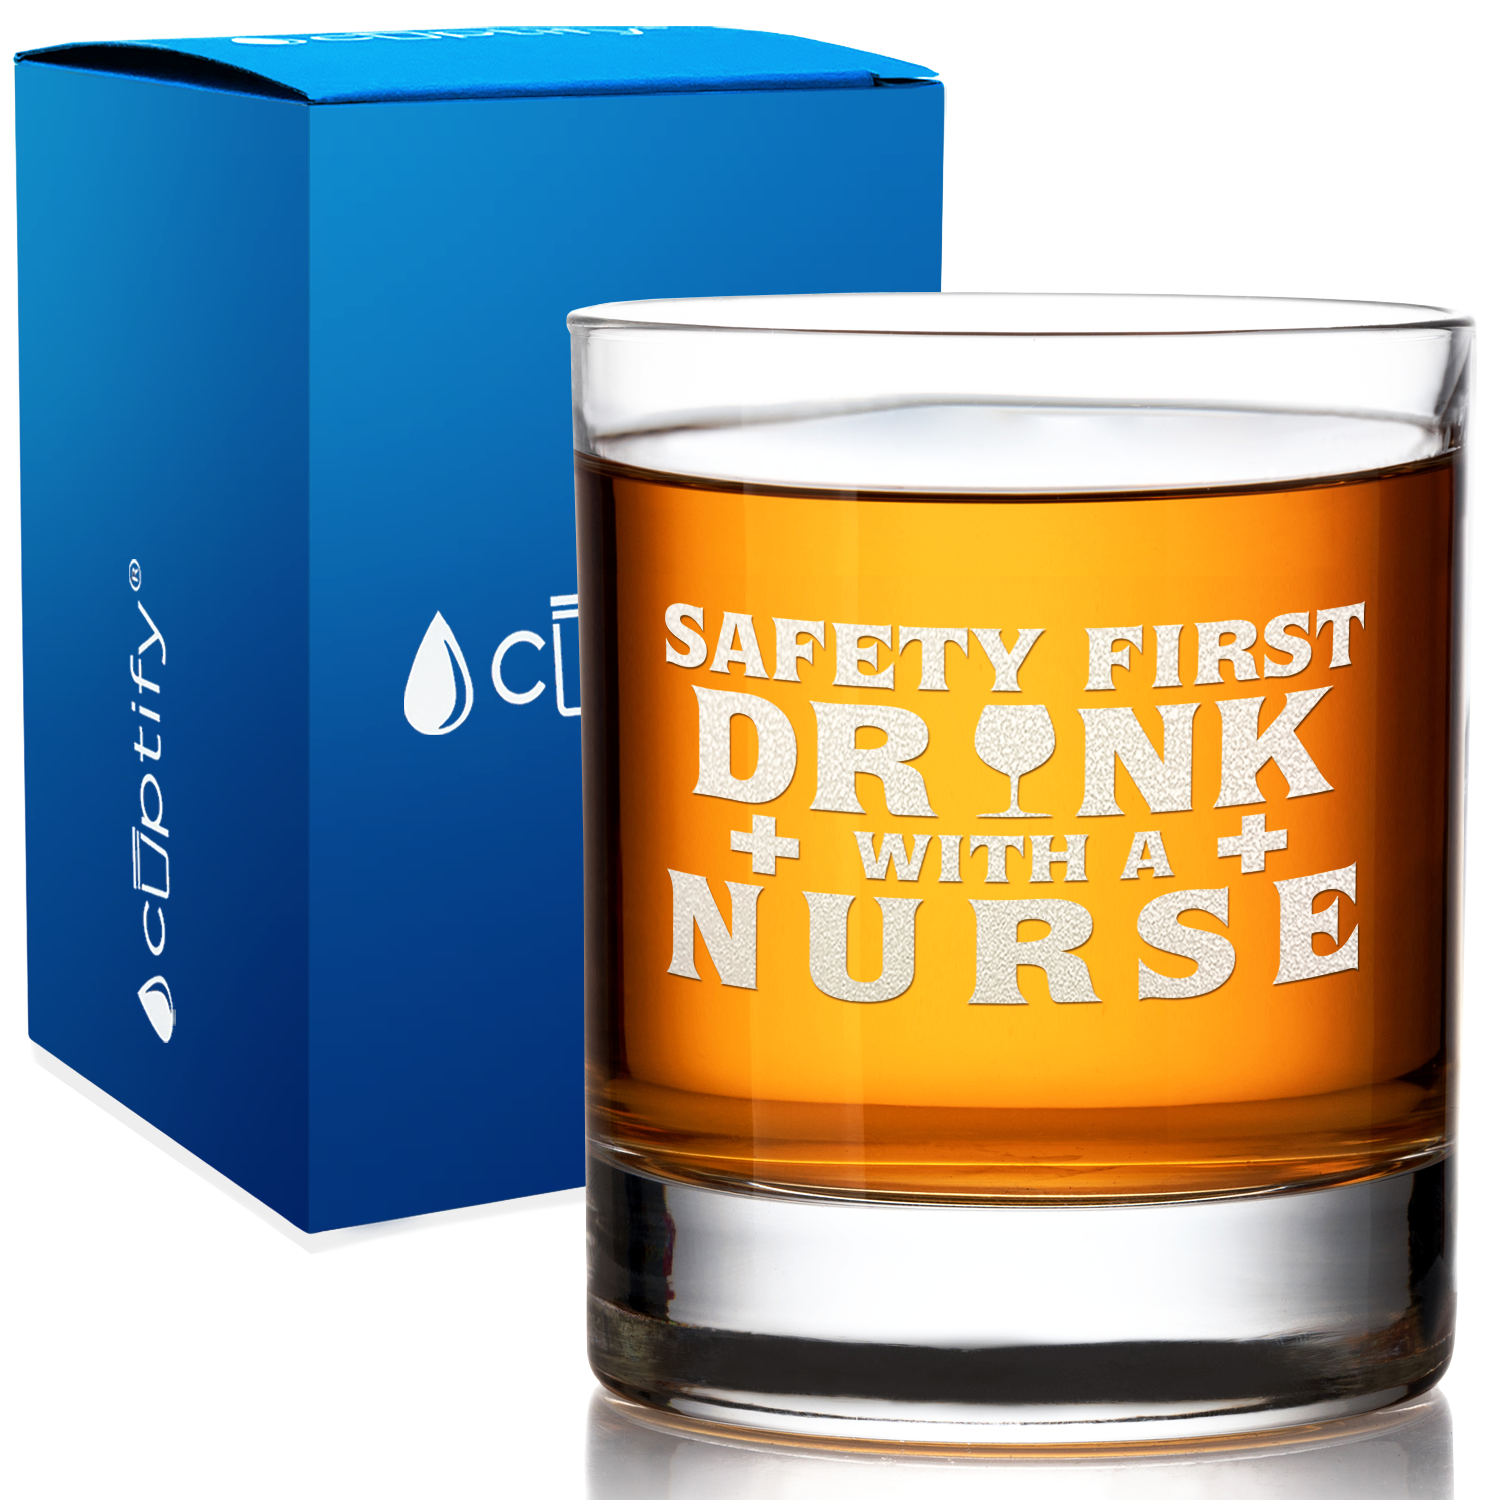 Safety First Drink with a Nurse on 10.25 oz Old Fashioned Glass